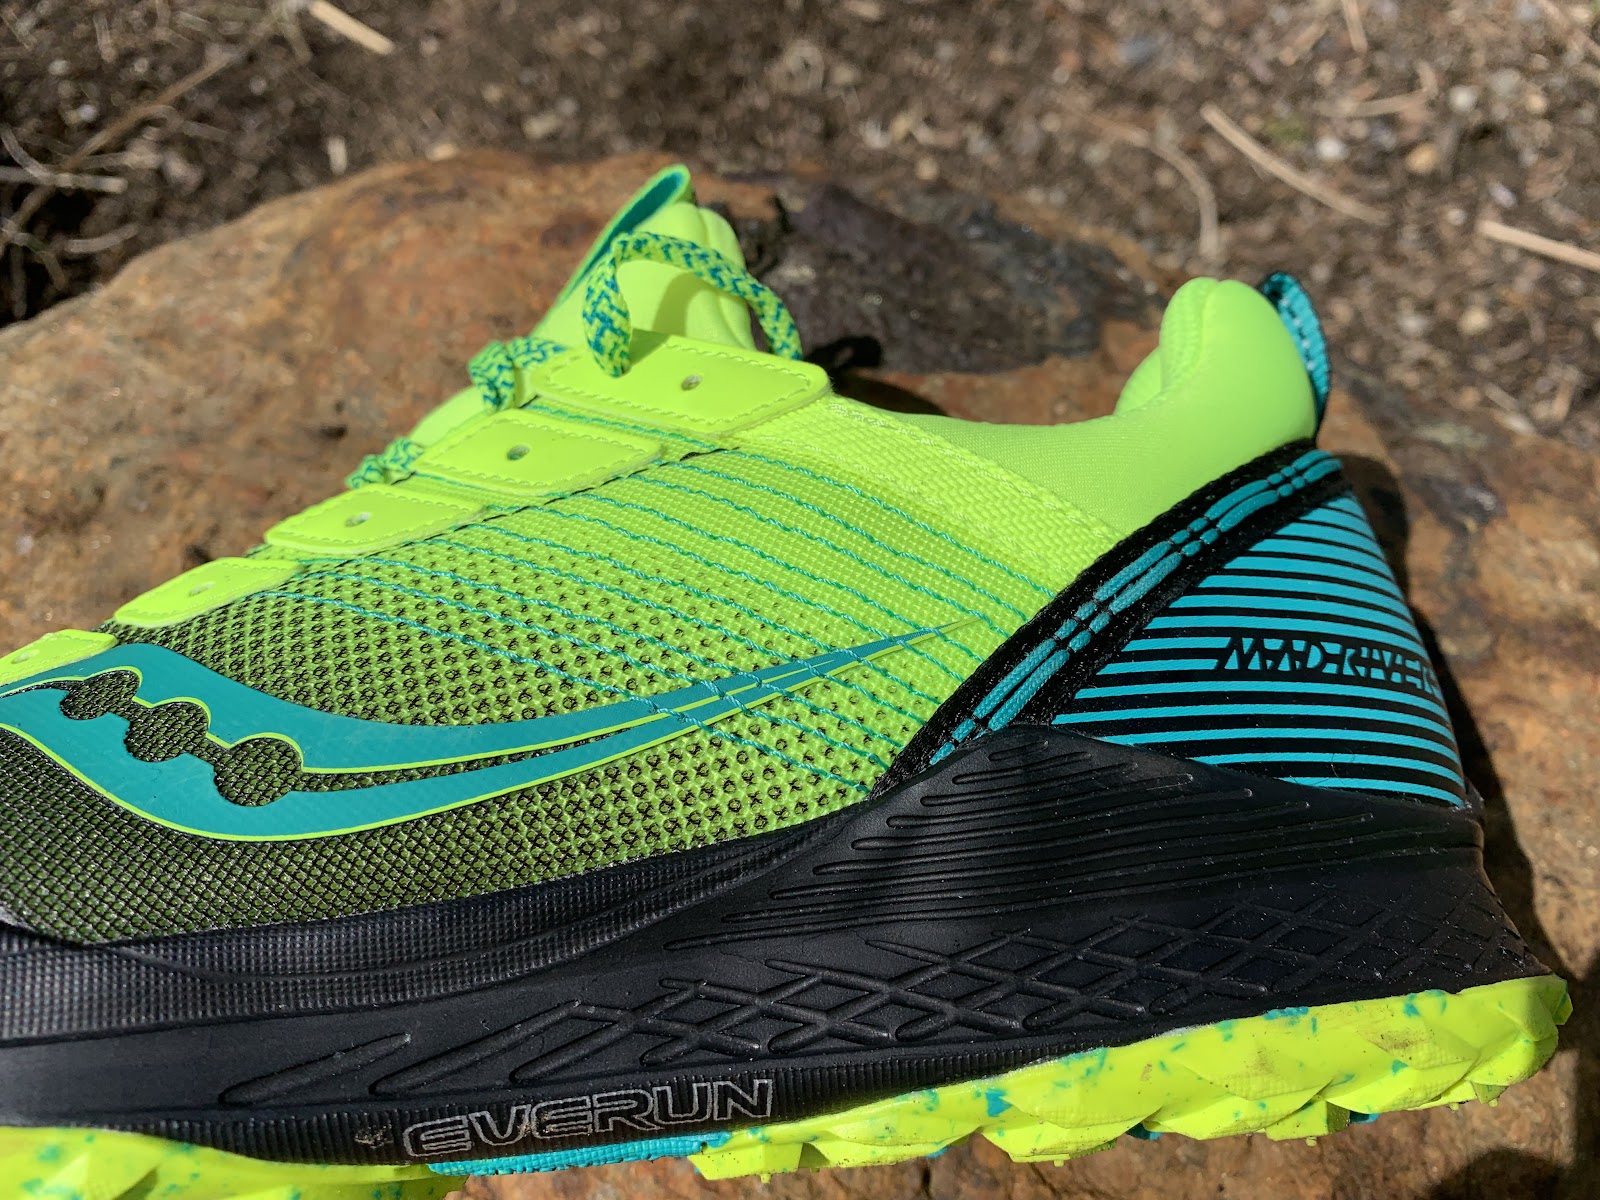 Road Trail Run: Saucony Mad River TR Review - A Unique Trail Runner ...